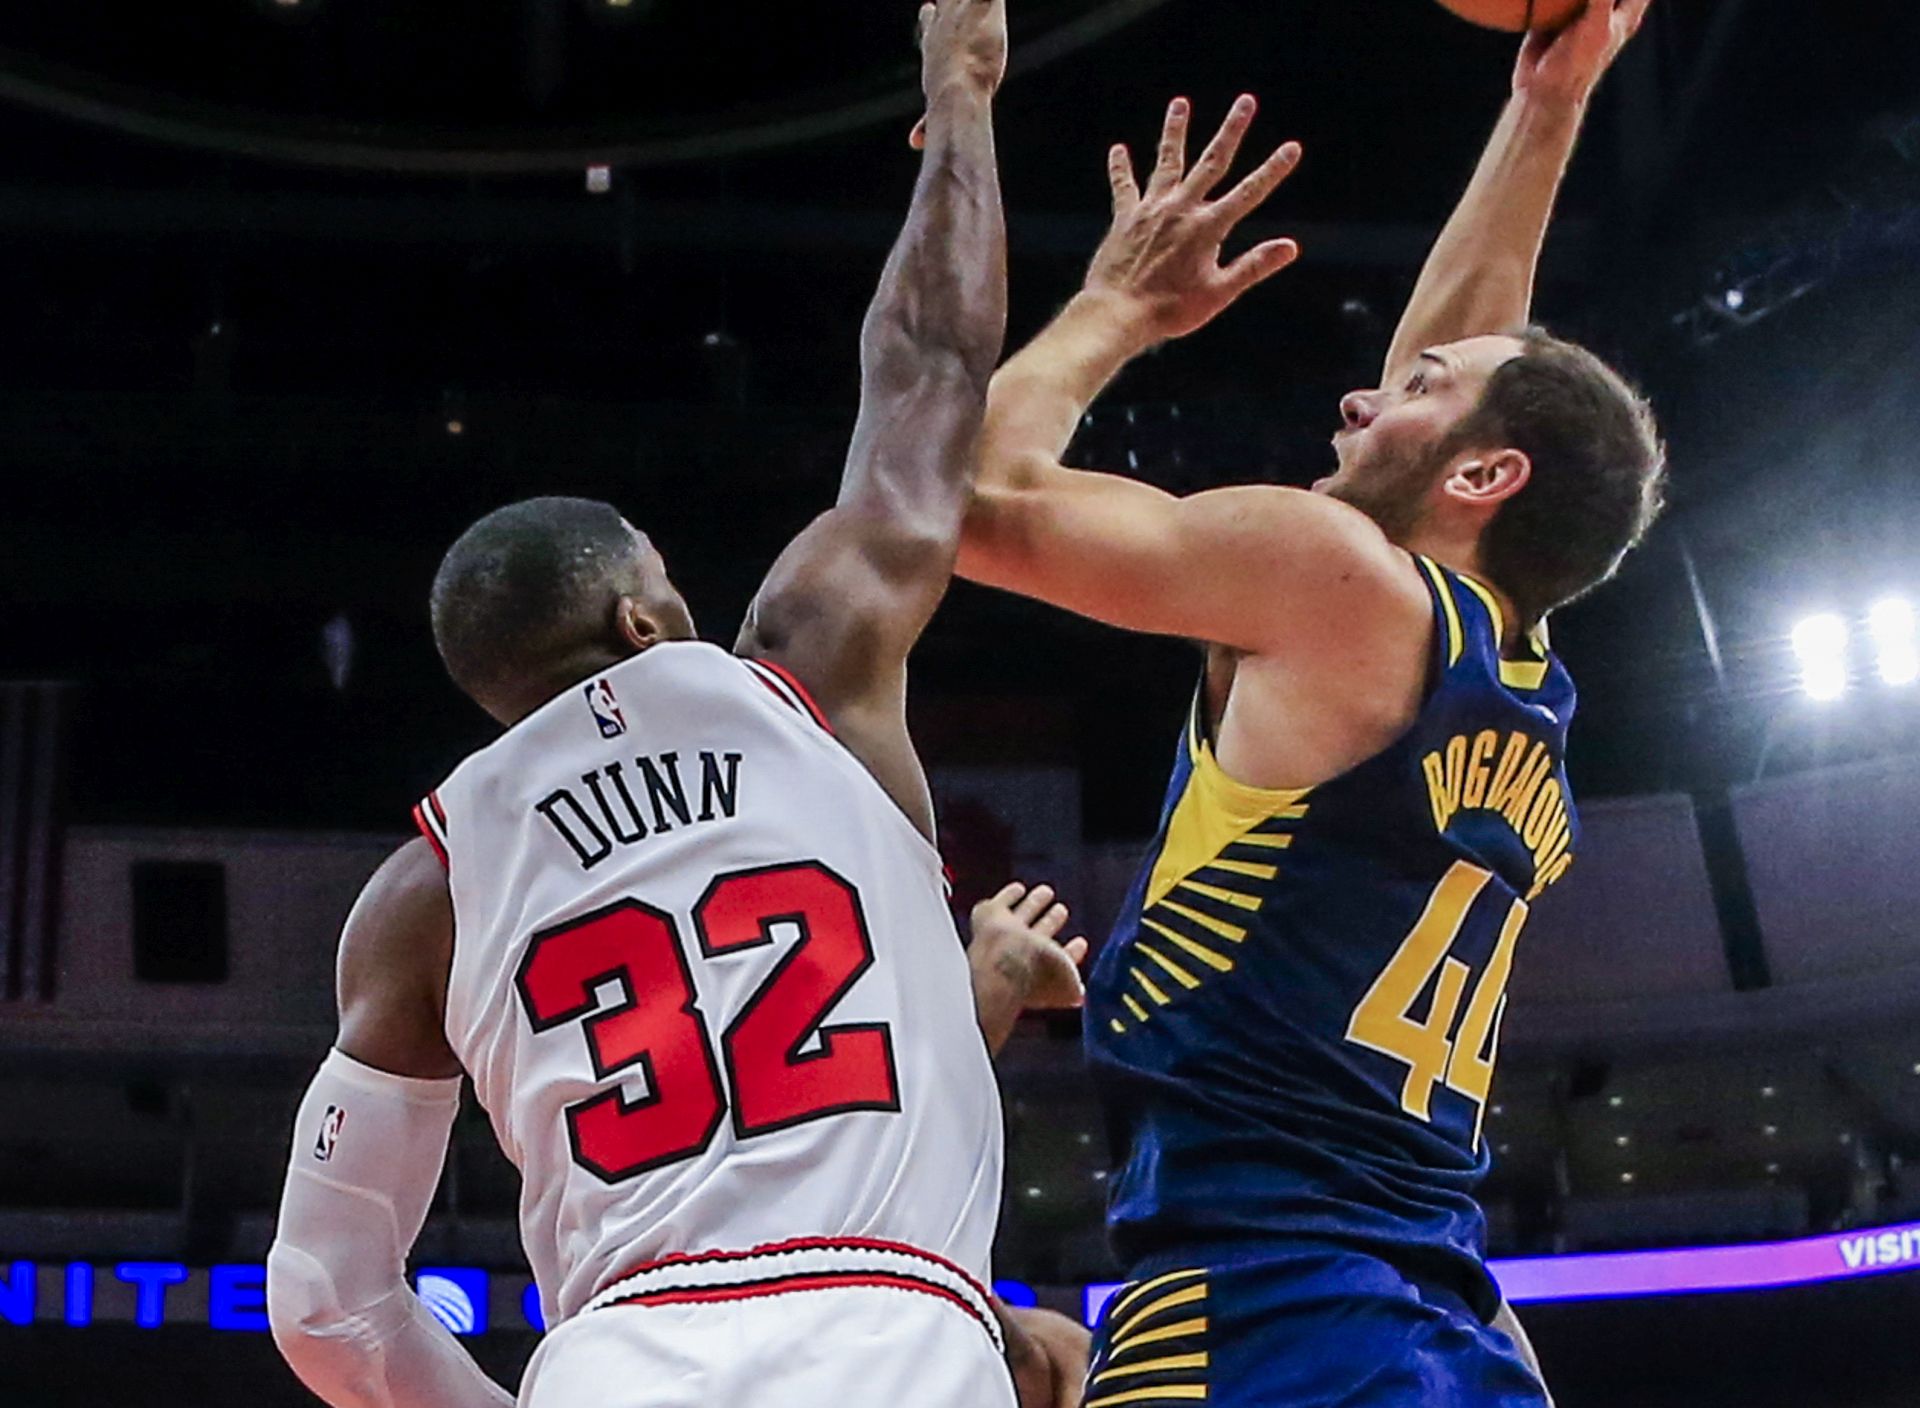 epa07084635 Indiana Pacers forward Bojan Bogdanovic of Croatia (R) shoots on Chicago Bulls guard Kris Dunn (L) in the first half of the NBA preseason basketball game between the Indiana Pacers and the Chicago Bulls at the United Center in Chicago, Illinois, USA, 10 October 2018.  EPA/TANNEN MAURY